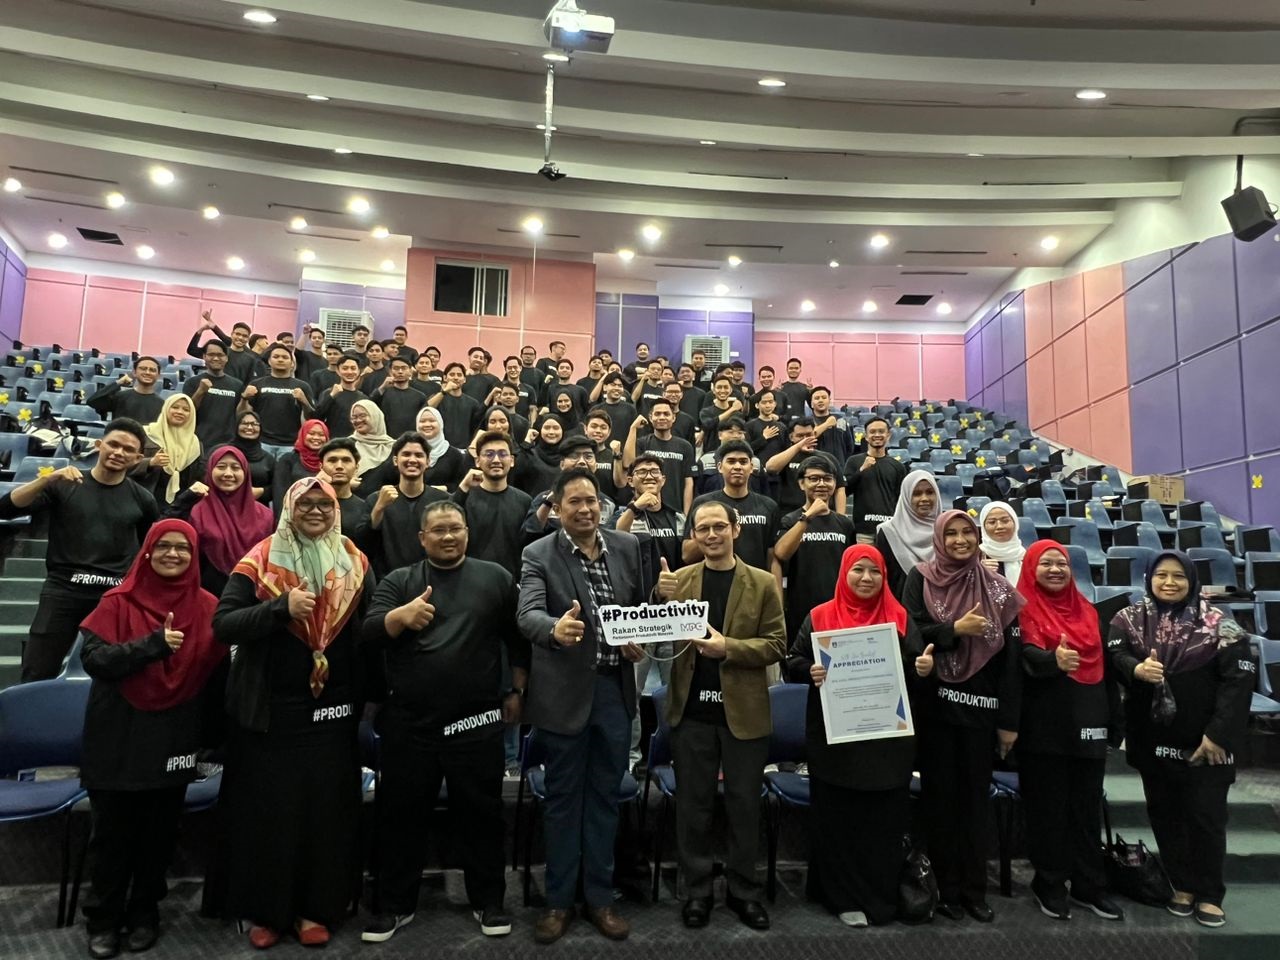 65 students from the elective final year course: World-Class Manufacturing from UiTM Shah Alam School of Mechanical Engineering.